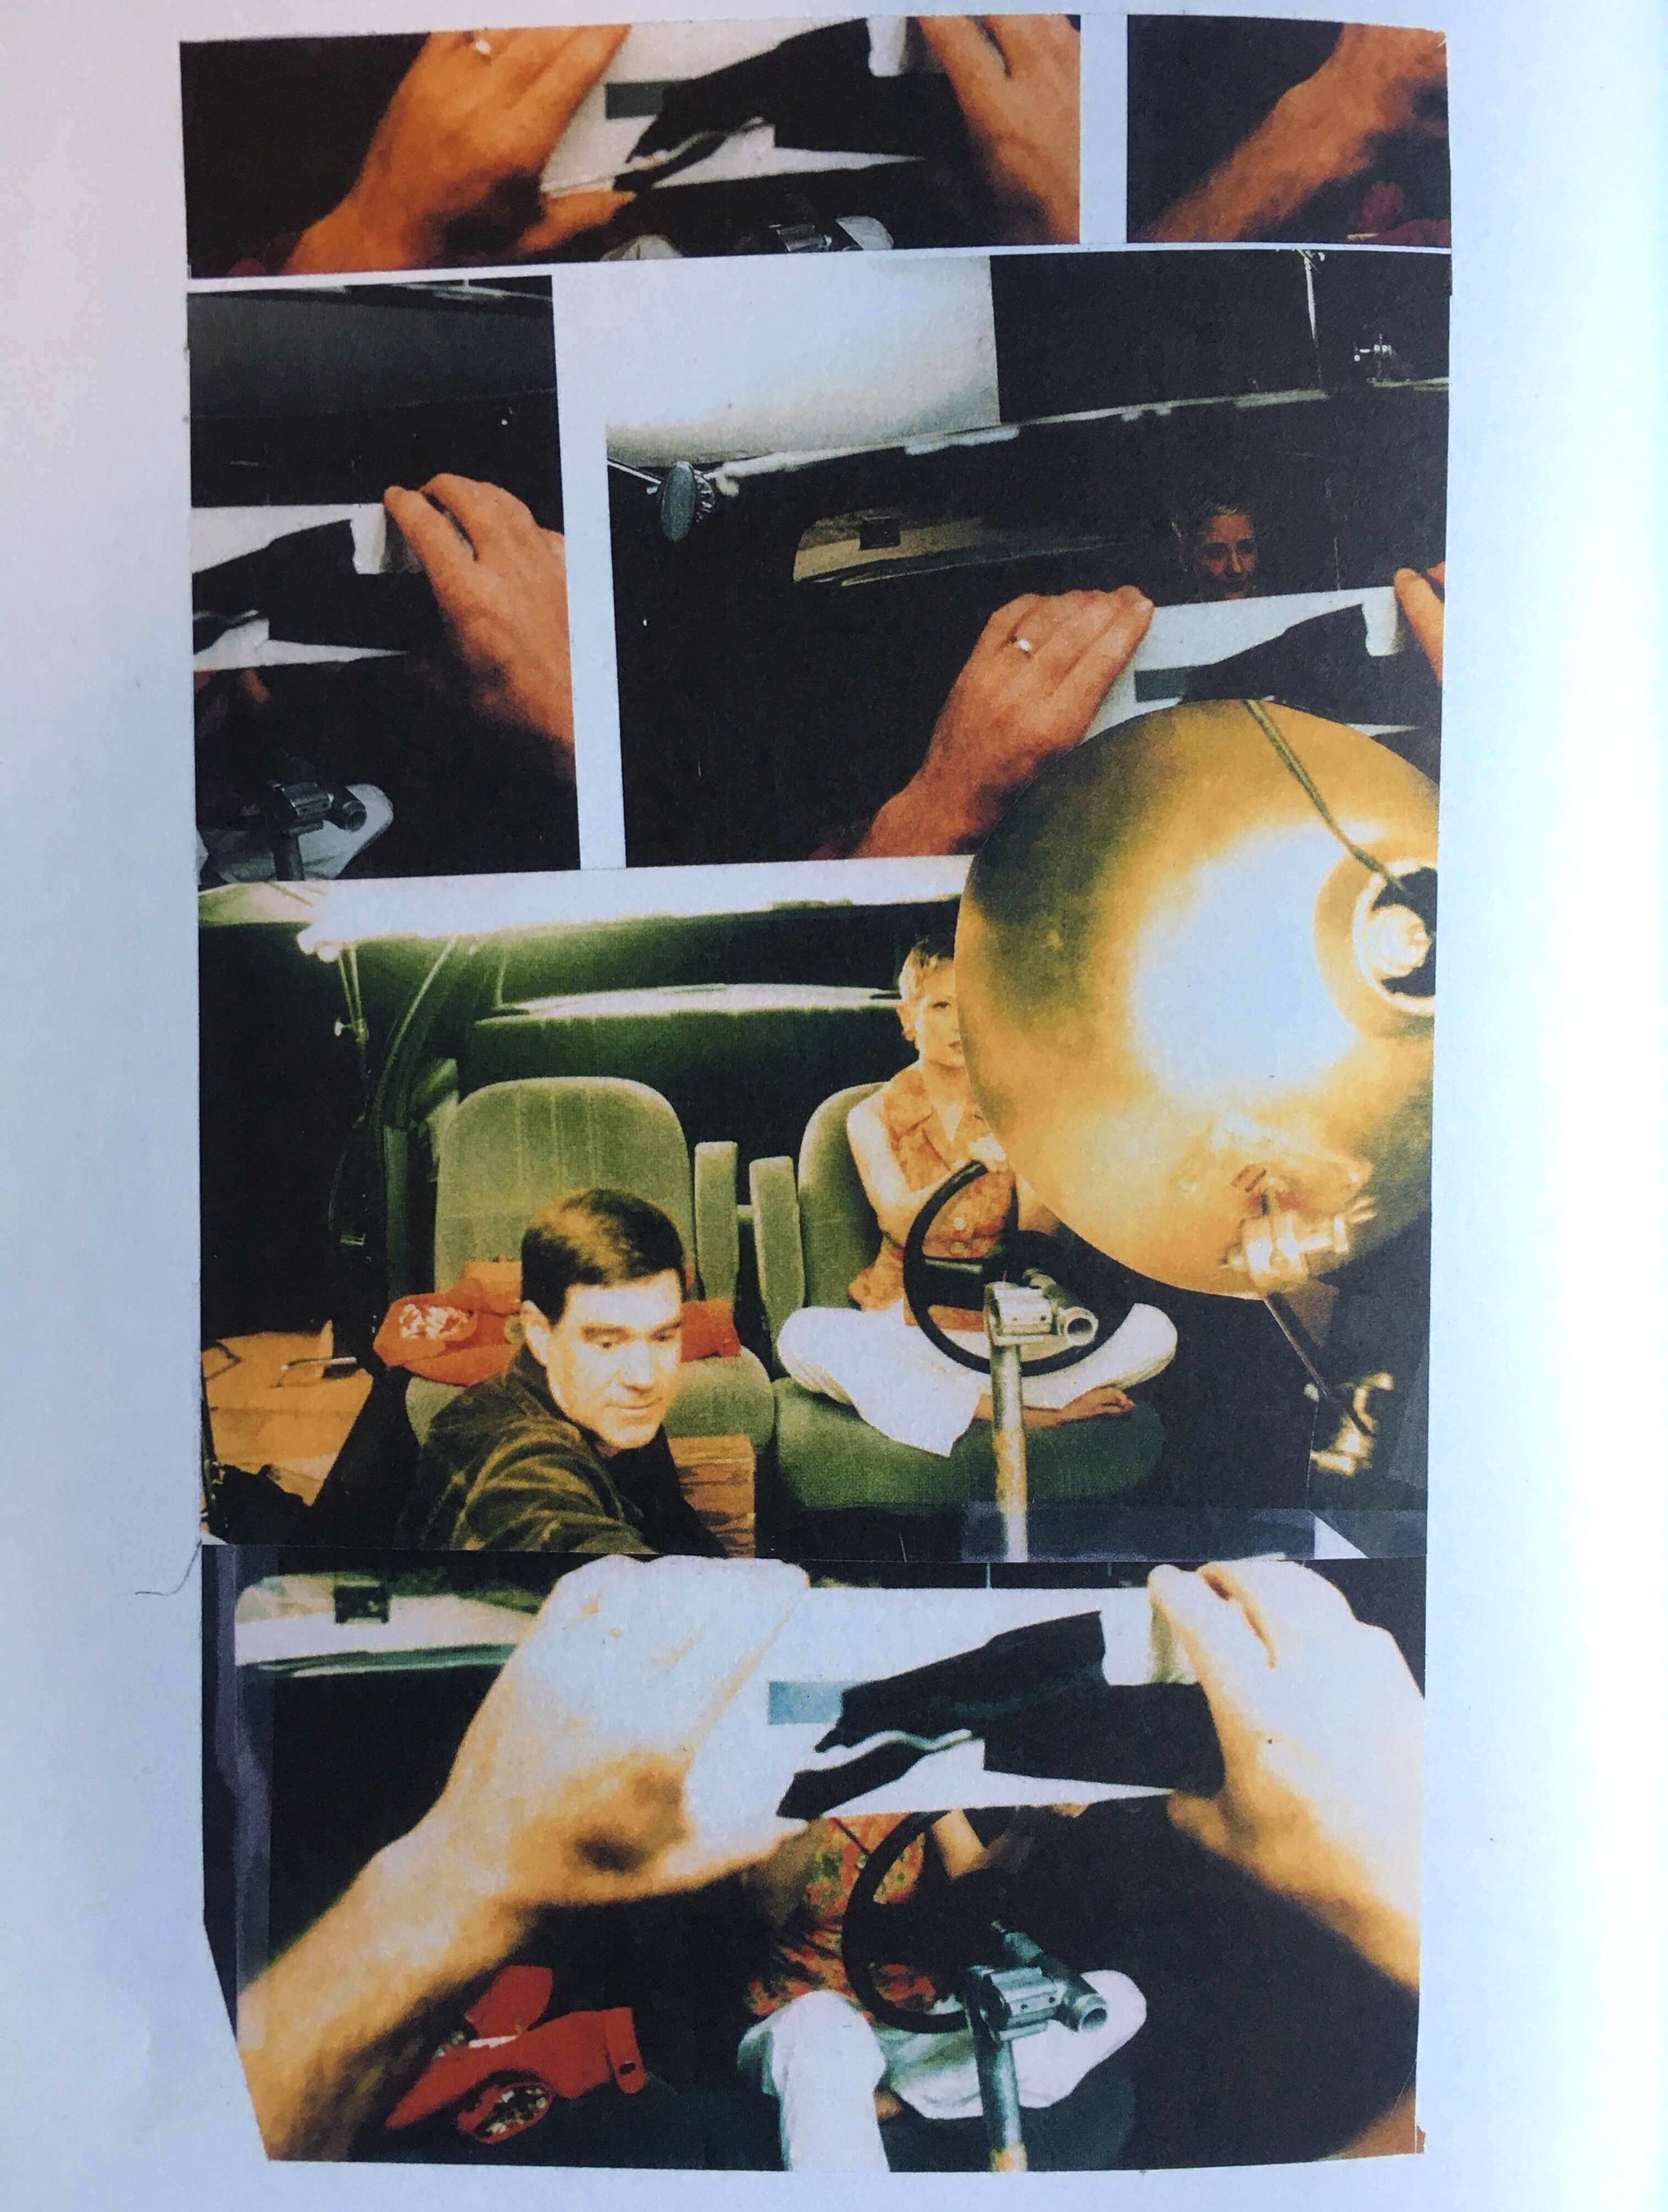 Christopher Doyle's collages on set of Van Sant's Psycho remake